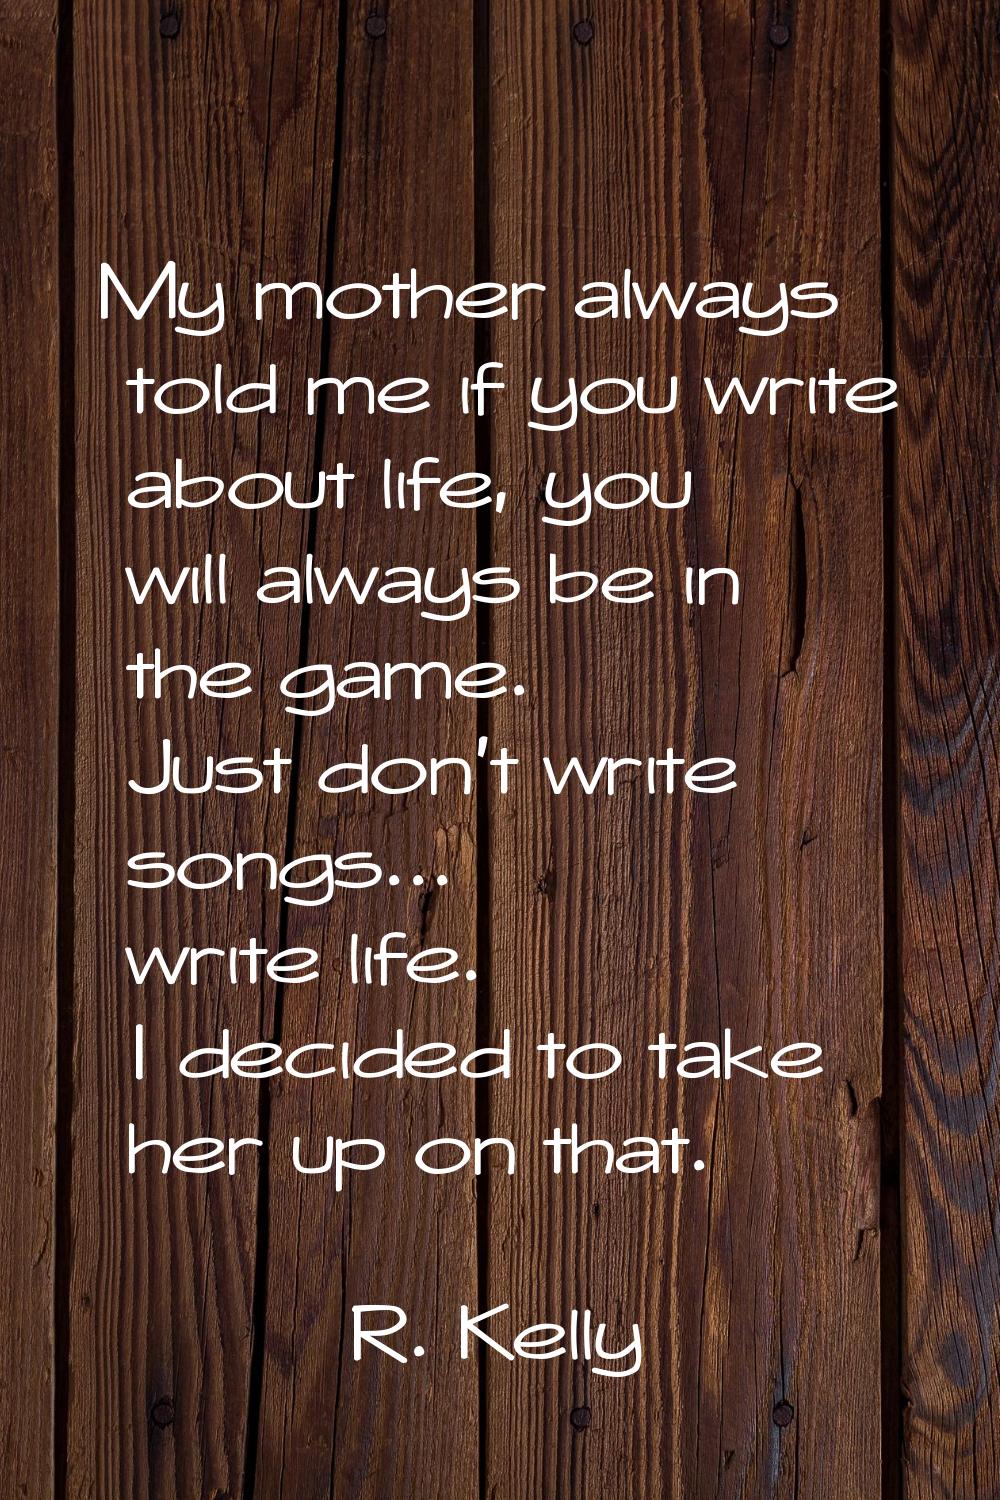 My mother always told me if you write about life, you will always be in the game. Just don't write 